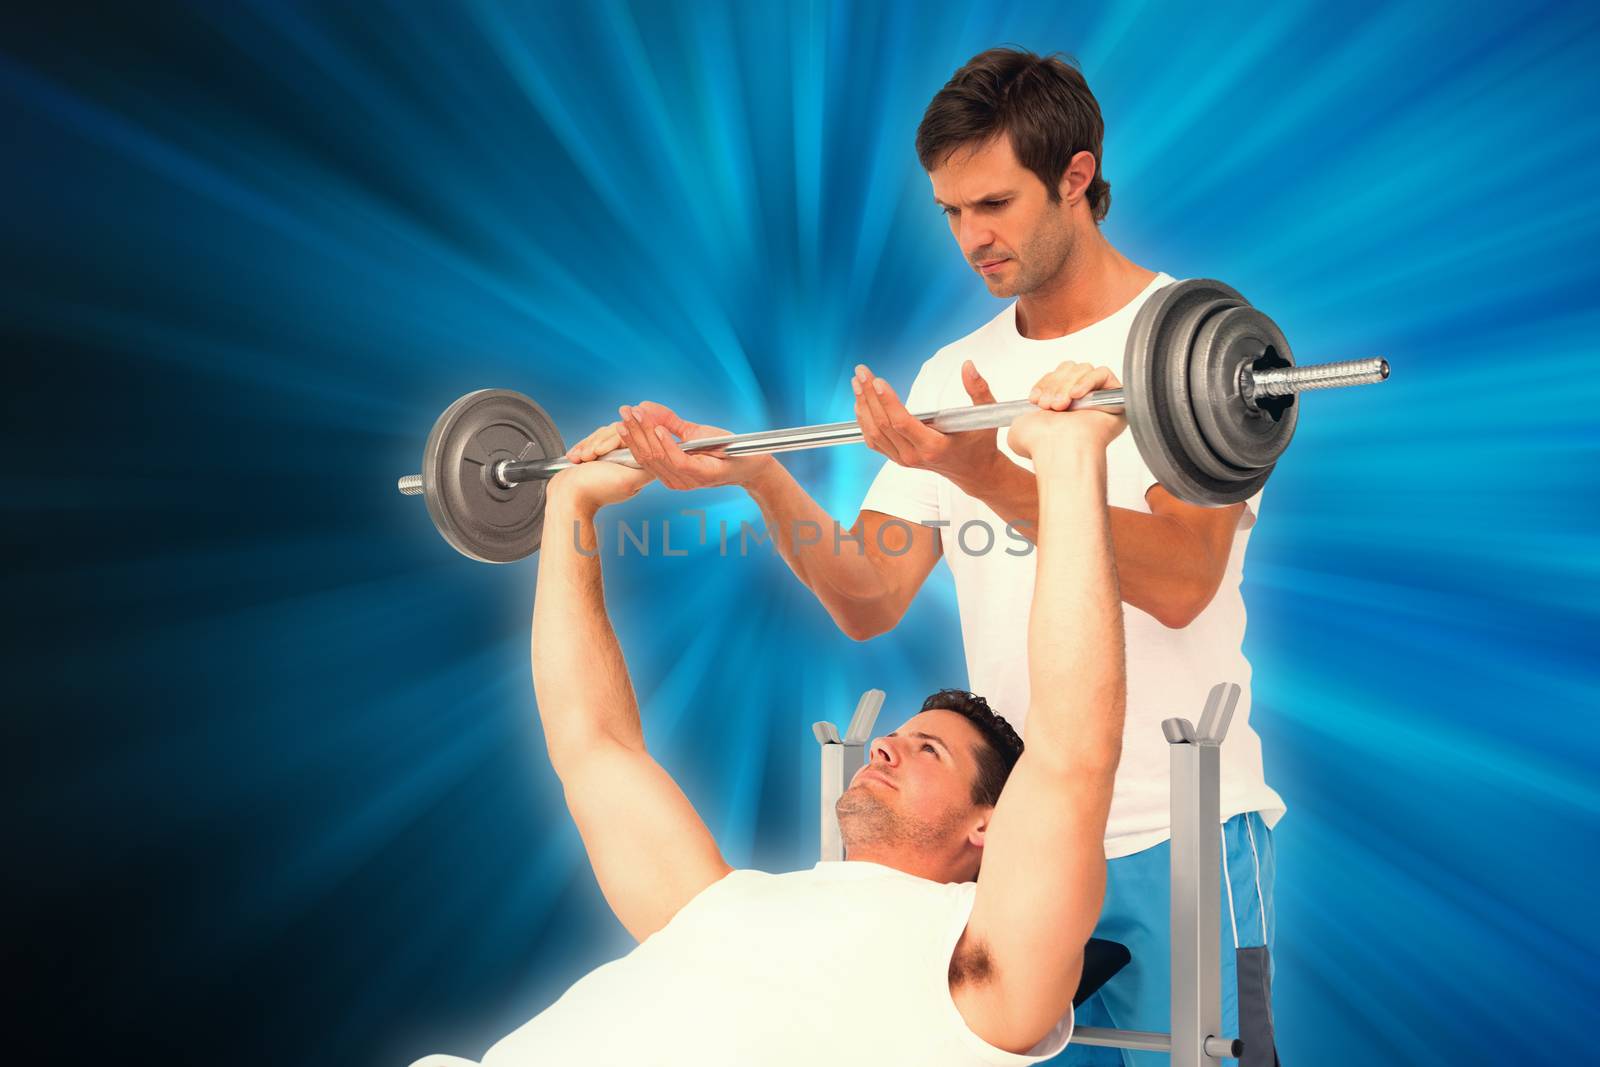 Trainer helping fit man to lift the barbell bench press against abstract background